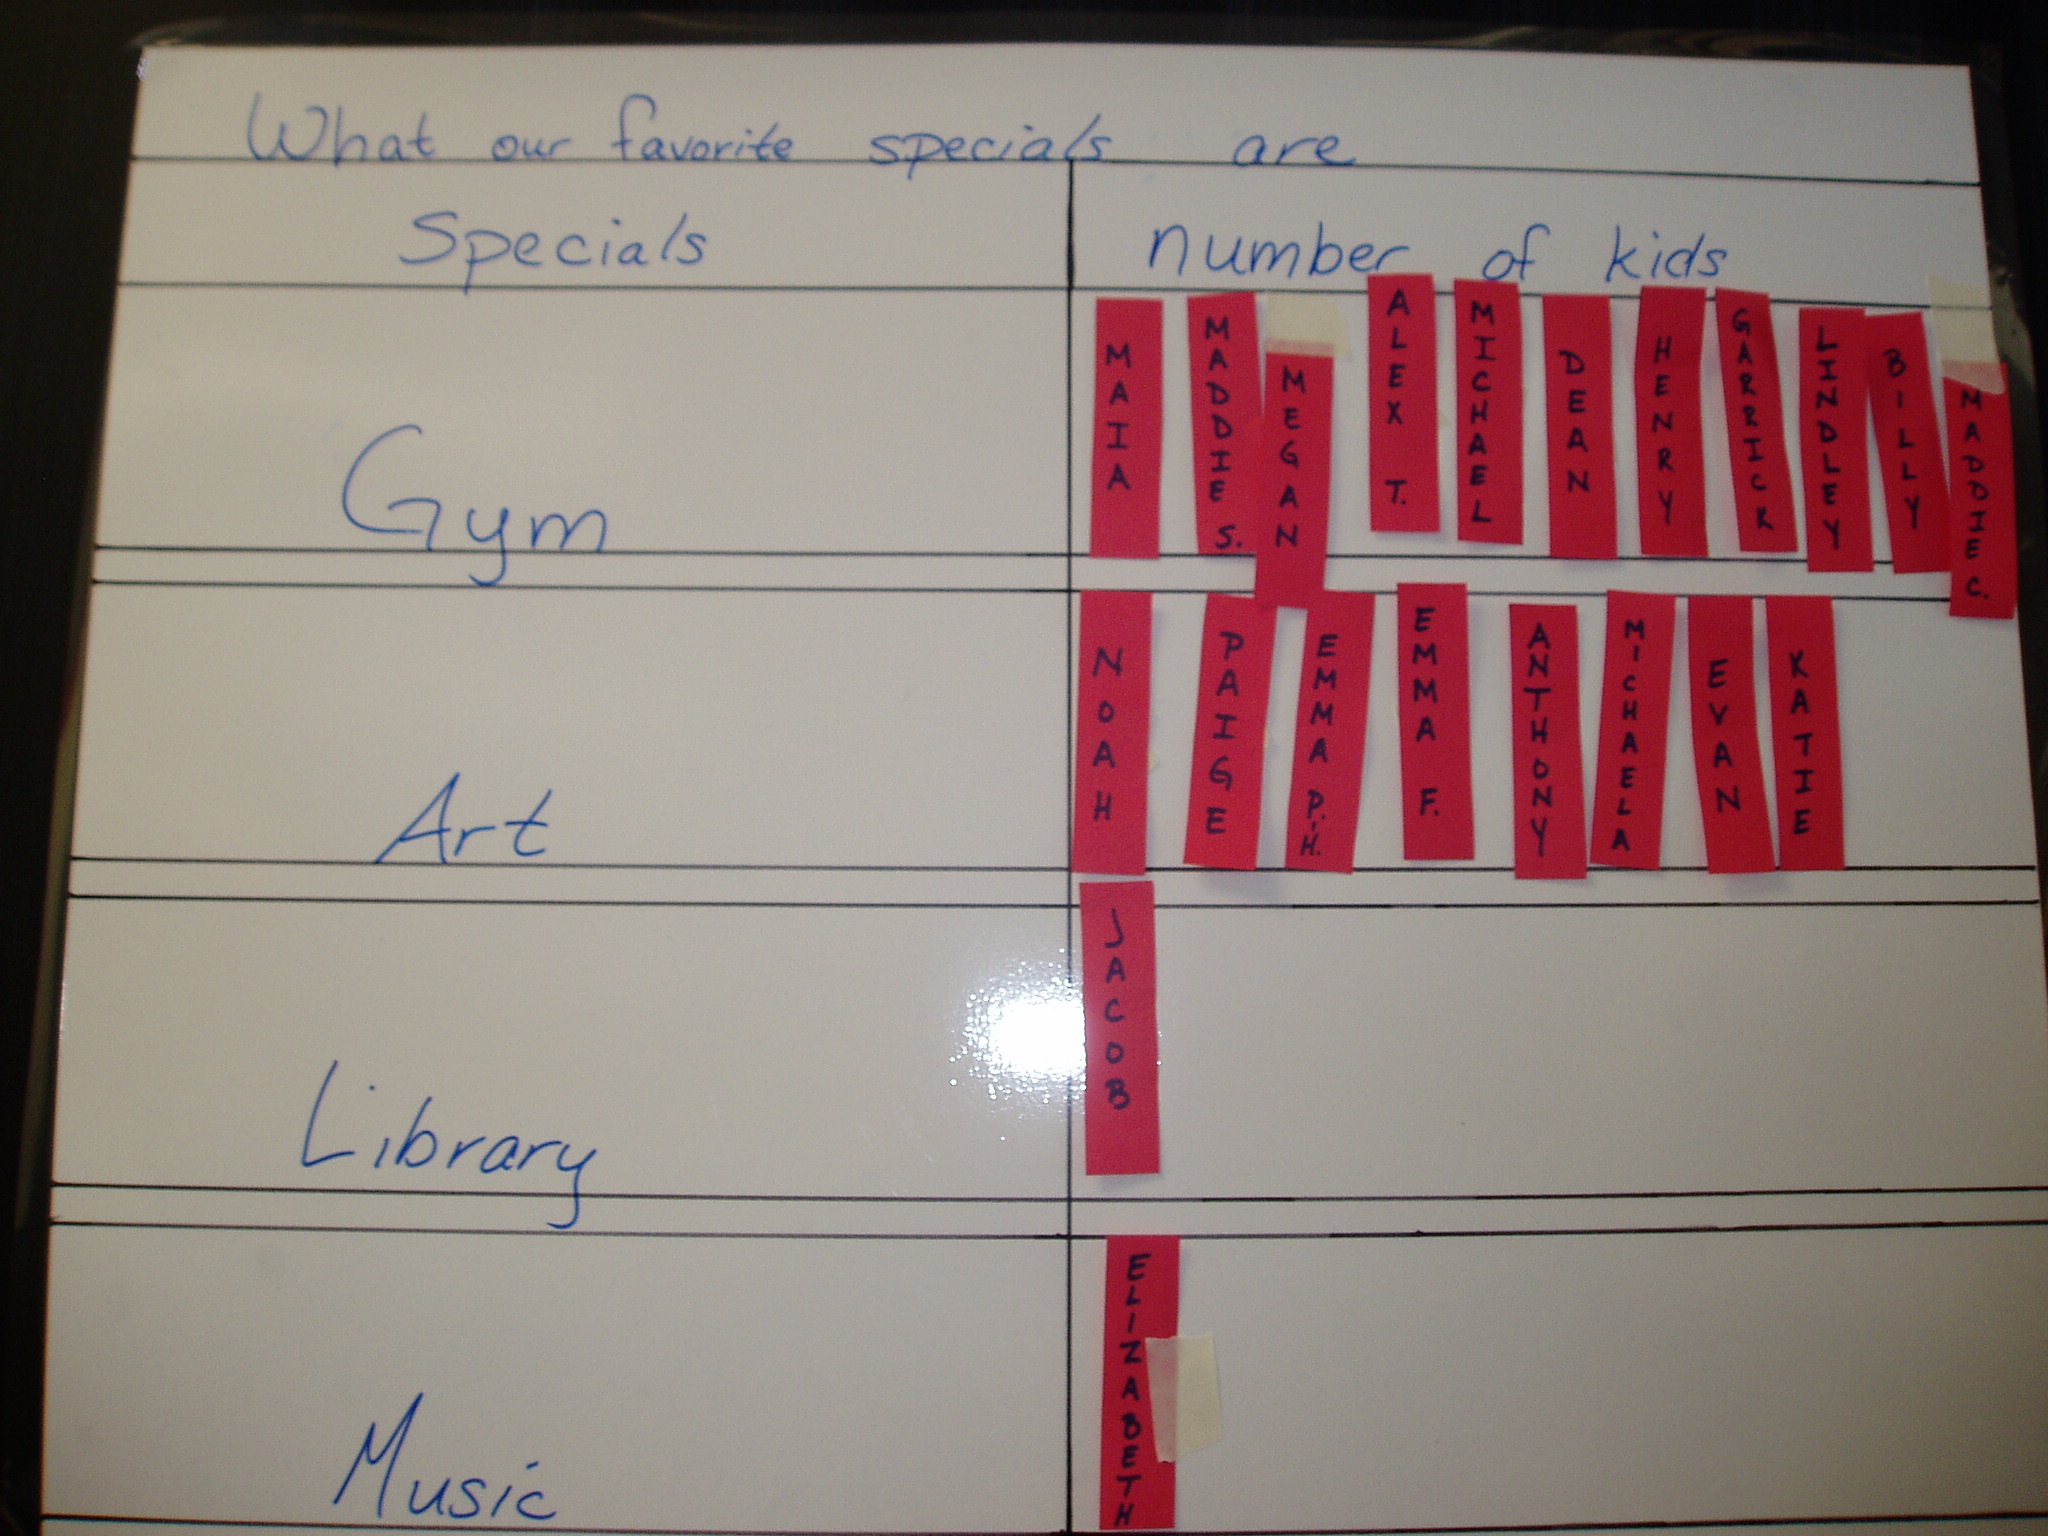 Class tally chart of favorite specials